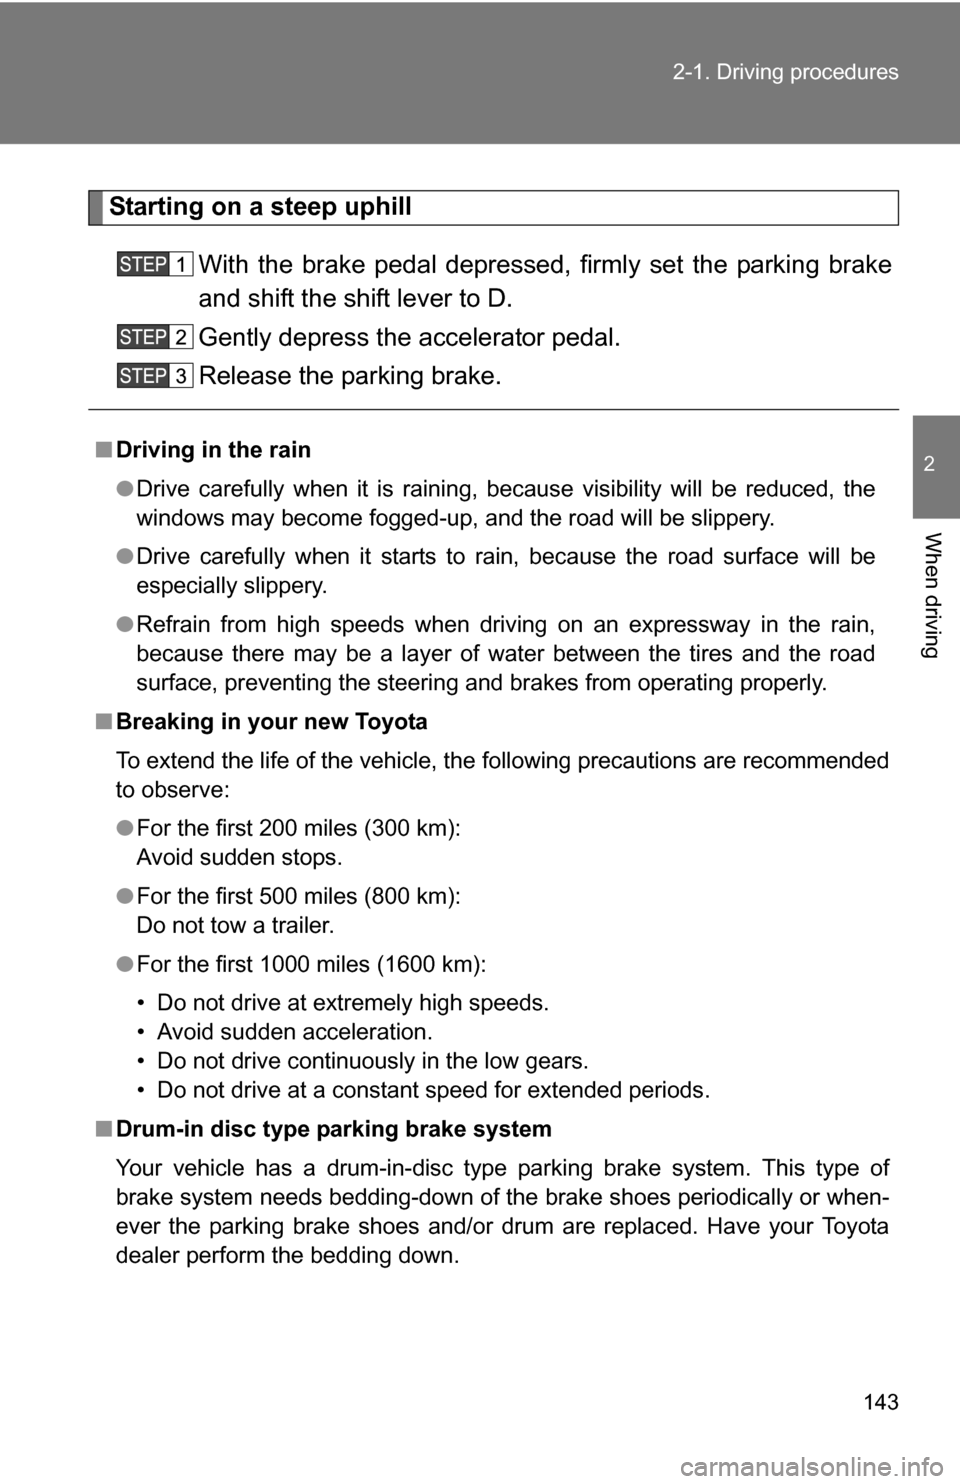 TOYOTA SEQUOIA 2009 2.G Owners Manual 143
2-1. Driving procedures
2
When driving
Starting on a steep uphill
With the brake pedal depressed, firmly set the parking brake
and shift the shift lever to D.
Gently depress the accelerator pedal.